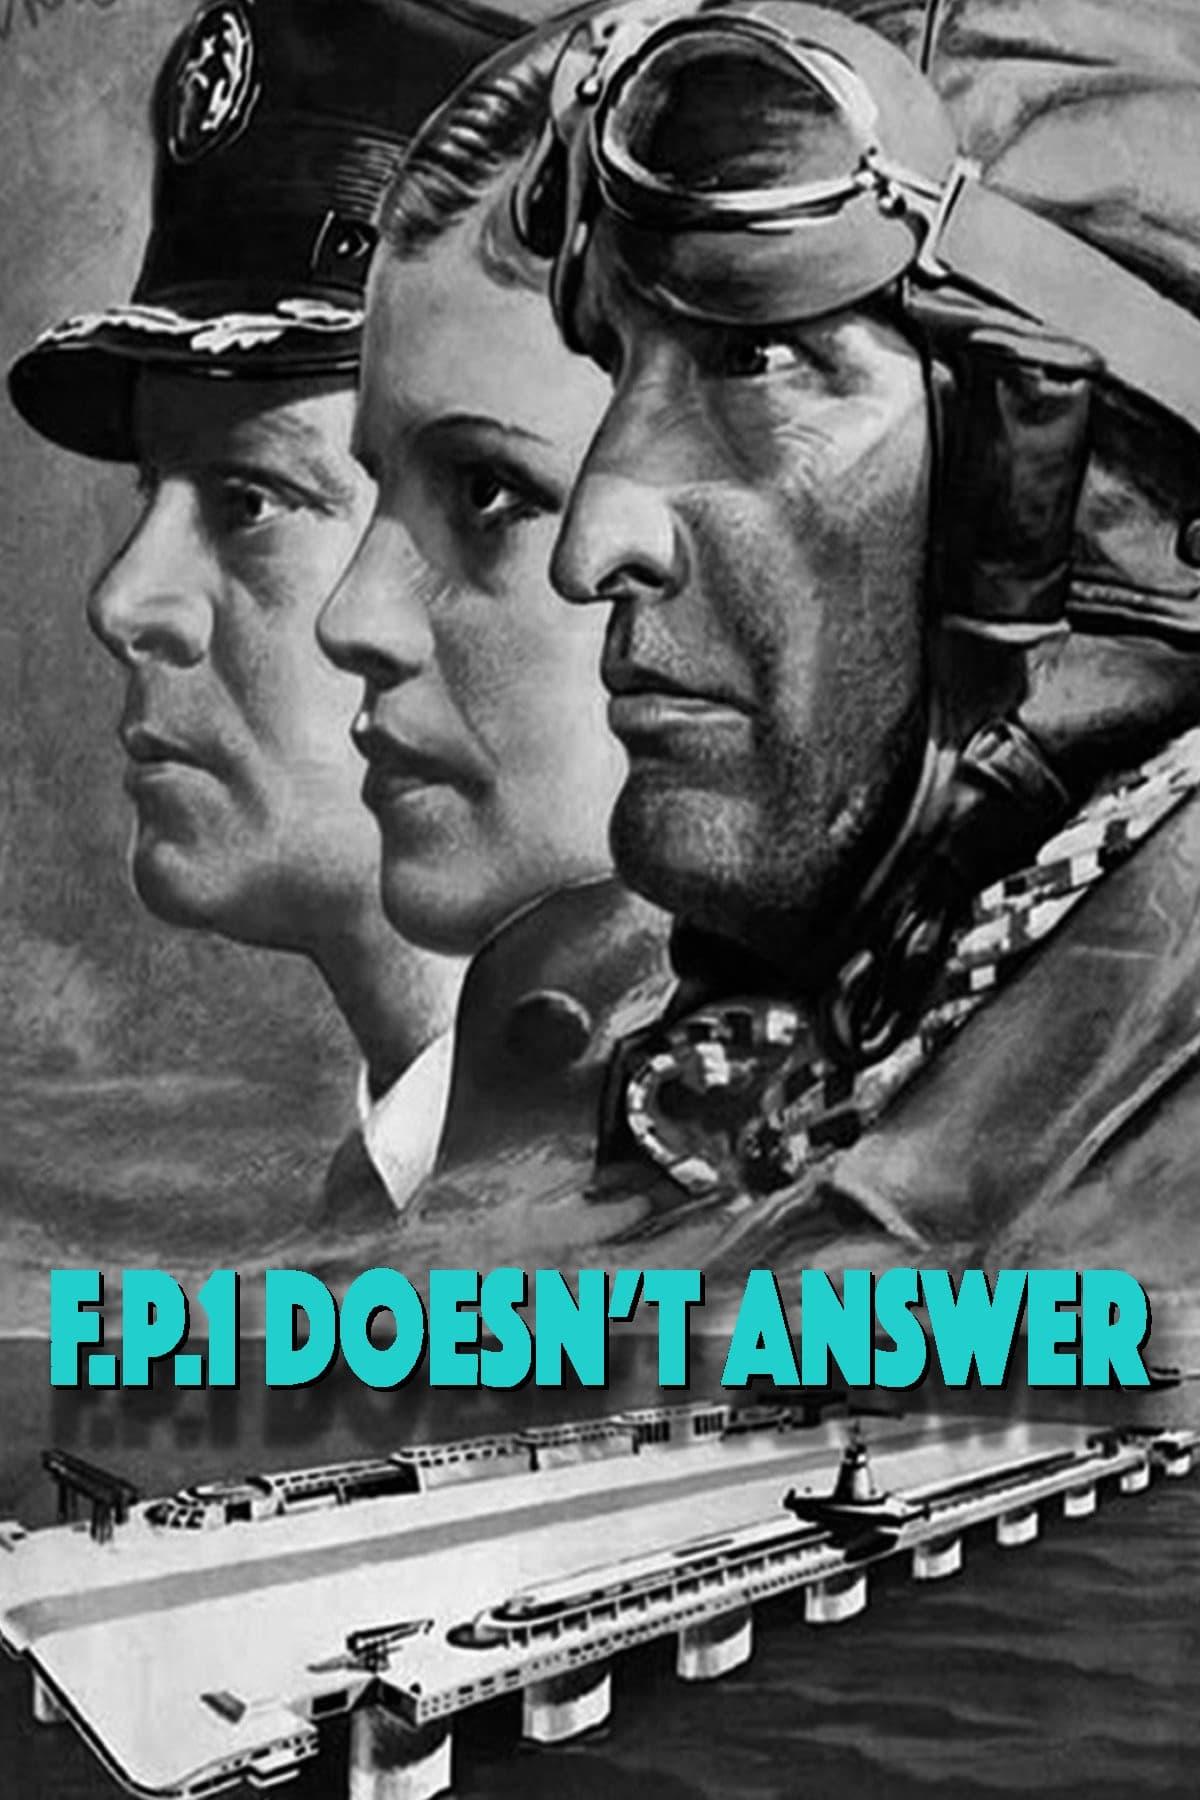 F.P.1 Doesn't Answer poster